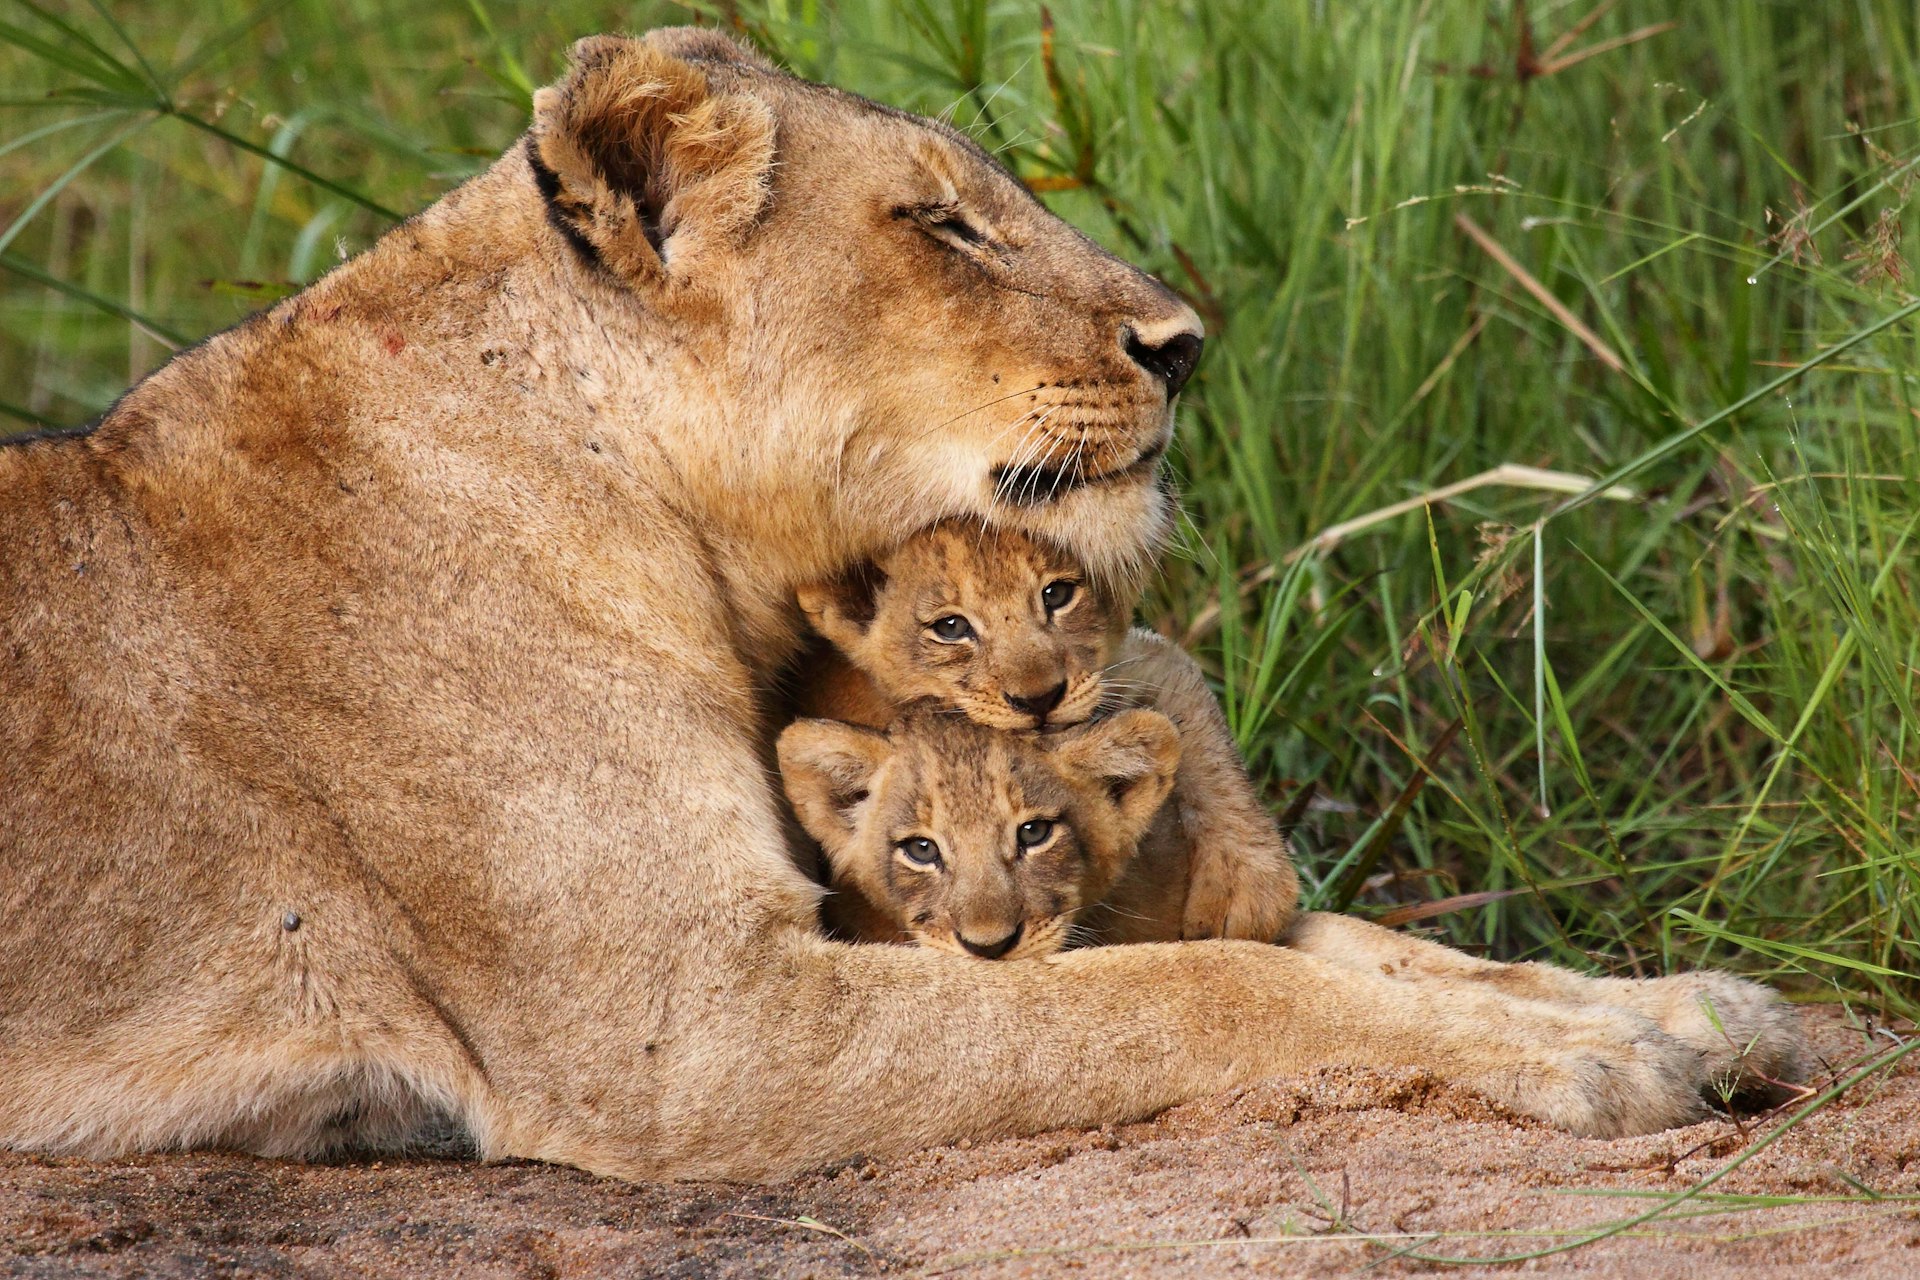 A lioness lies on the ground with two cubs nestled between her paws